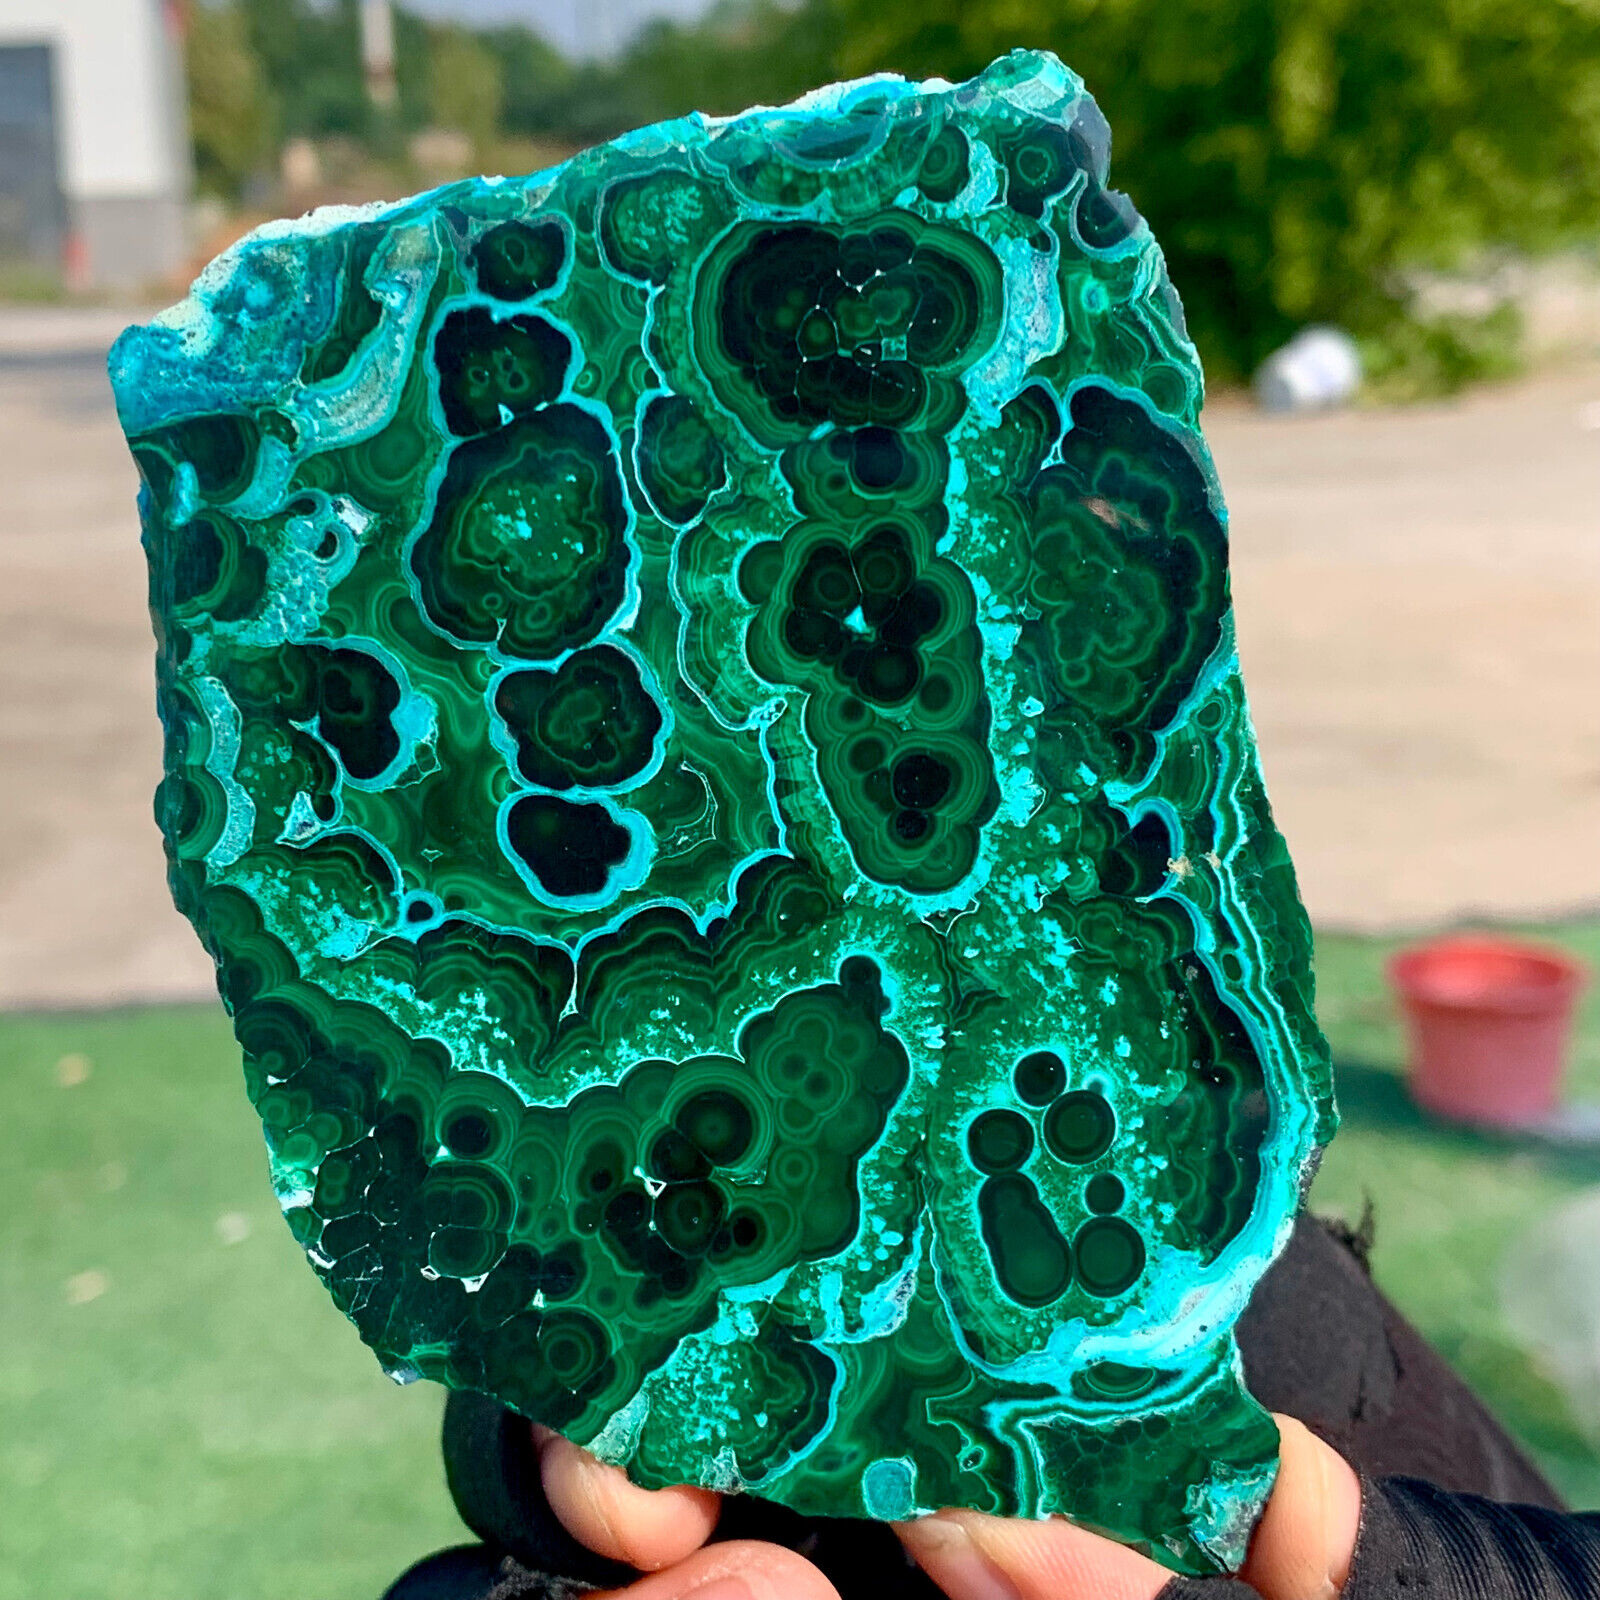 209G Natural chrysocolla/Malachite transparent cluster rough mineral sample